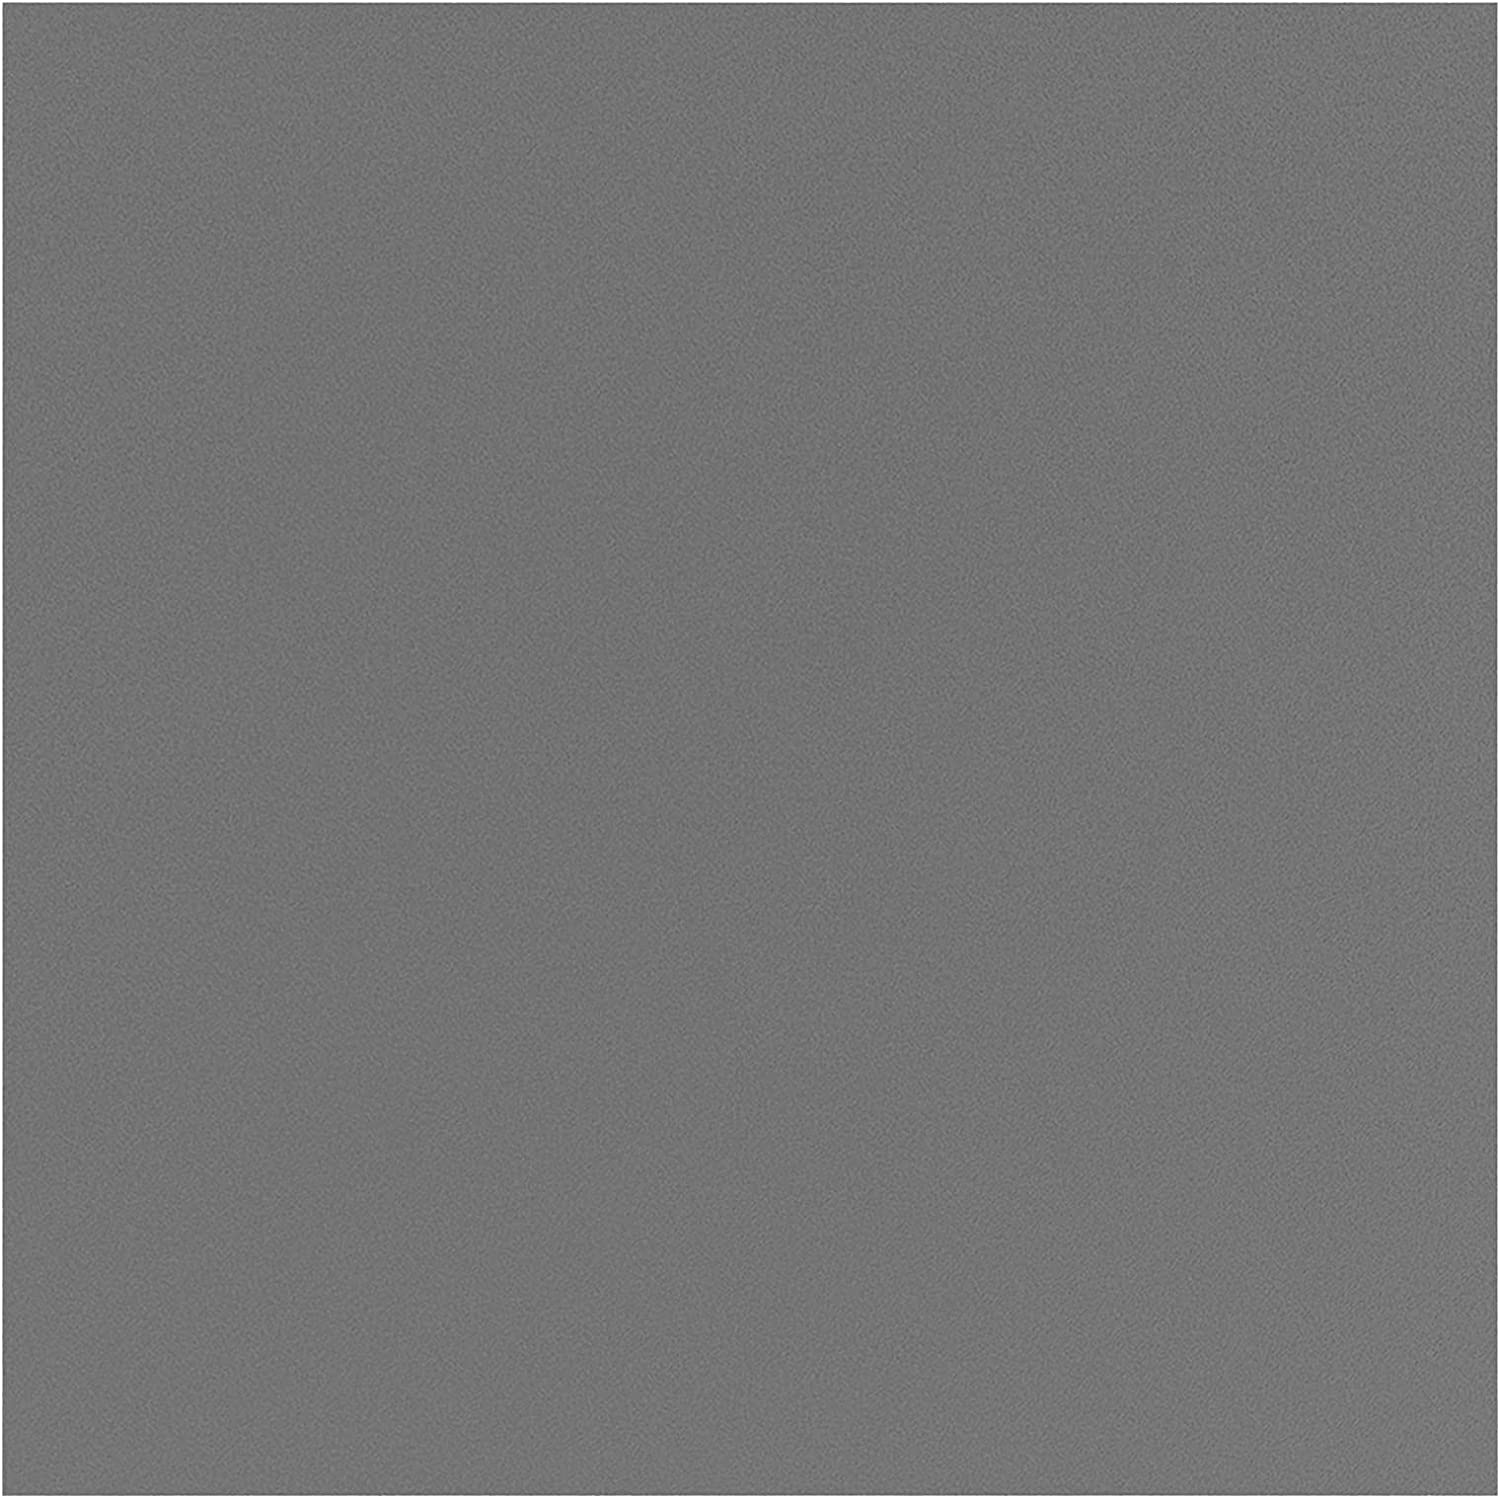 Coavas Privacy Window Film Sun UV Blocking Frosted Static Clings Non Adhesive Opaque Vinyl Decorative Glass Door Stickers Heat Control Coverings for Bathroom(35.4 x 118.1 Inch, Grey)